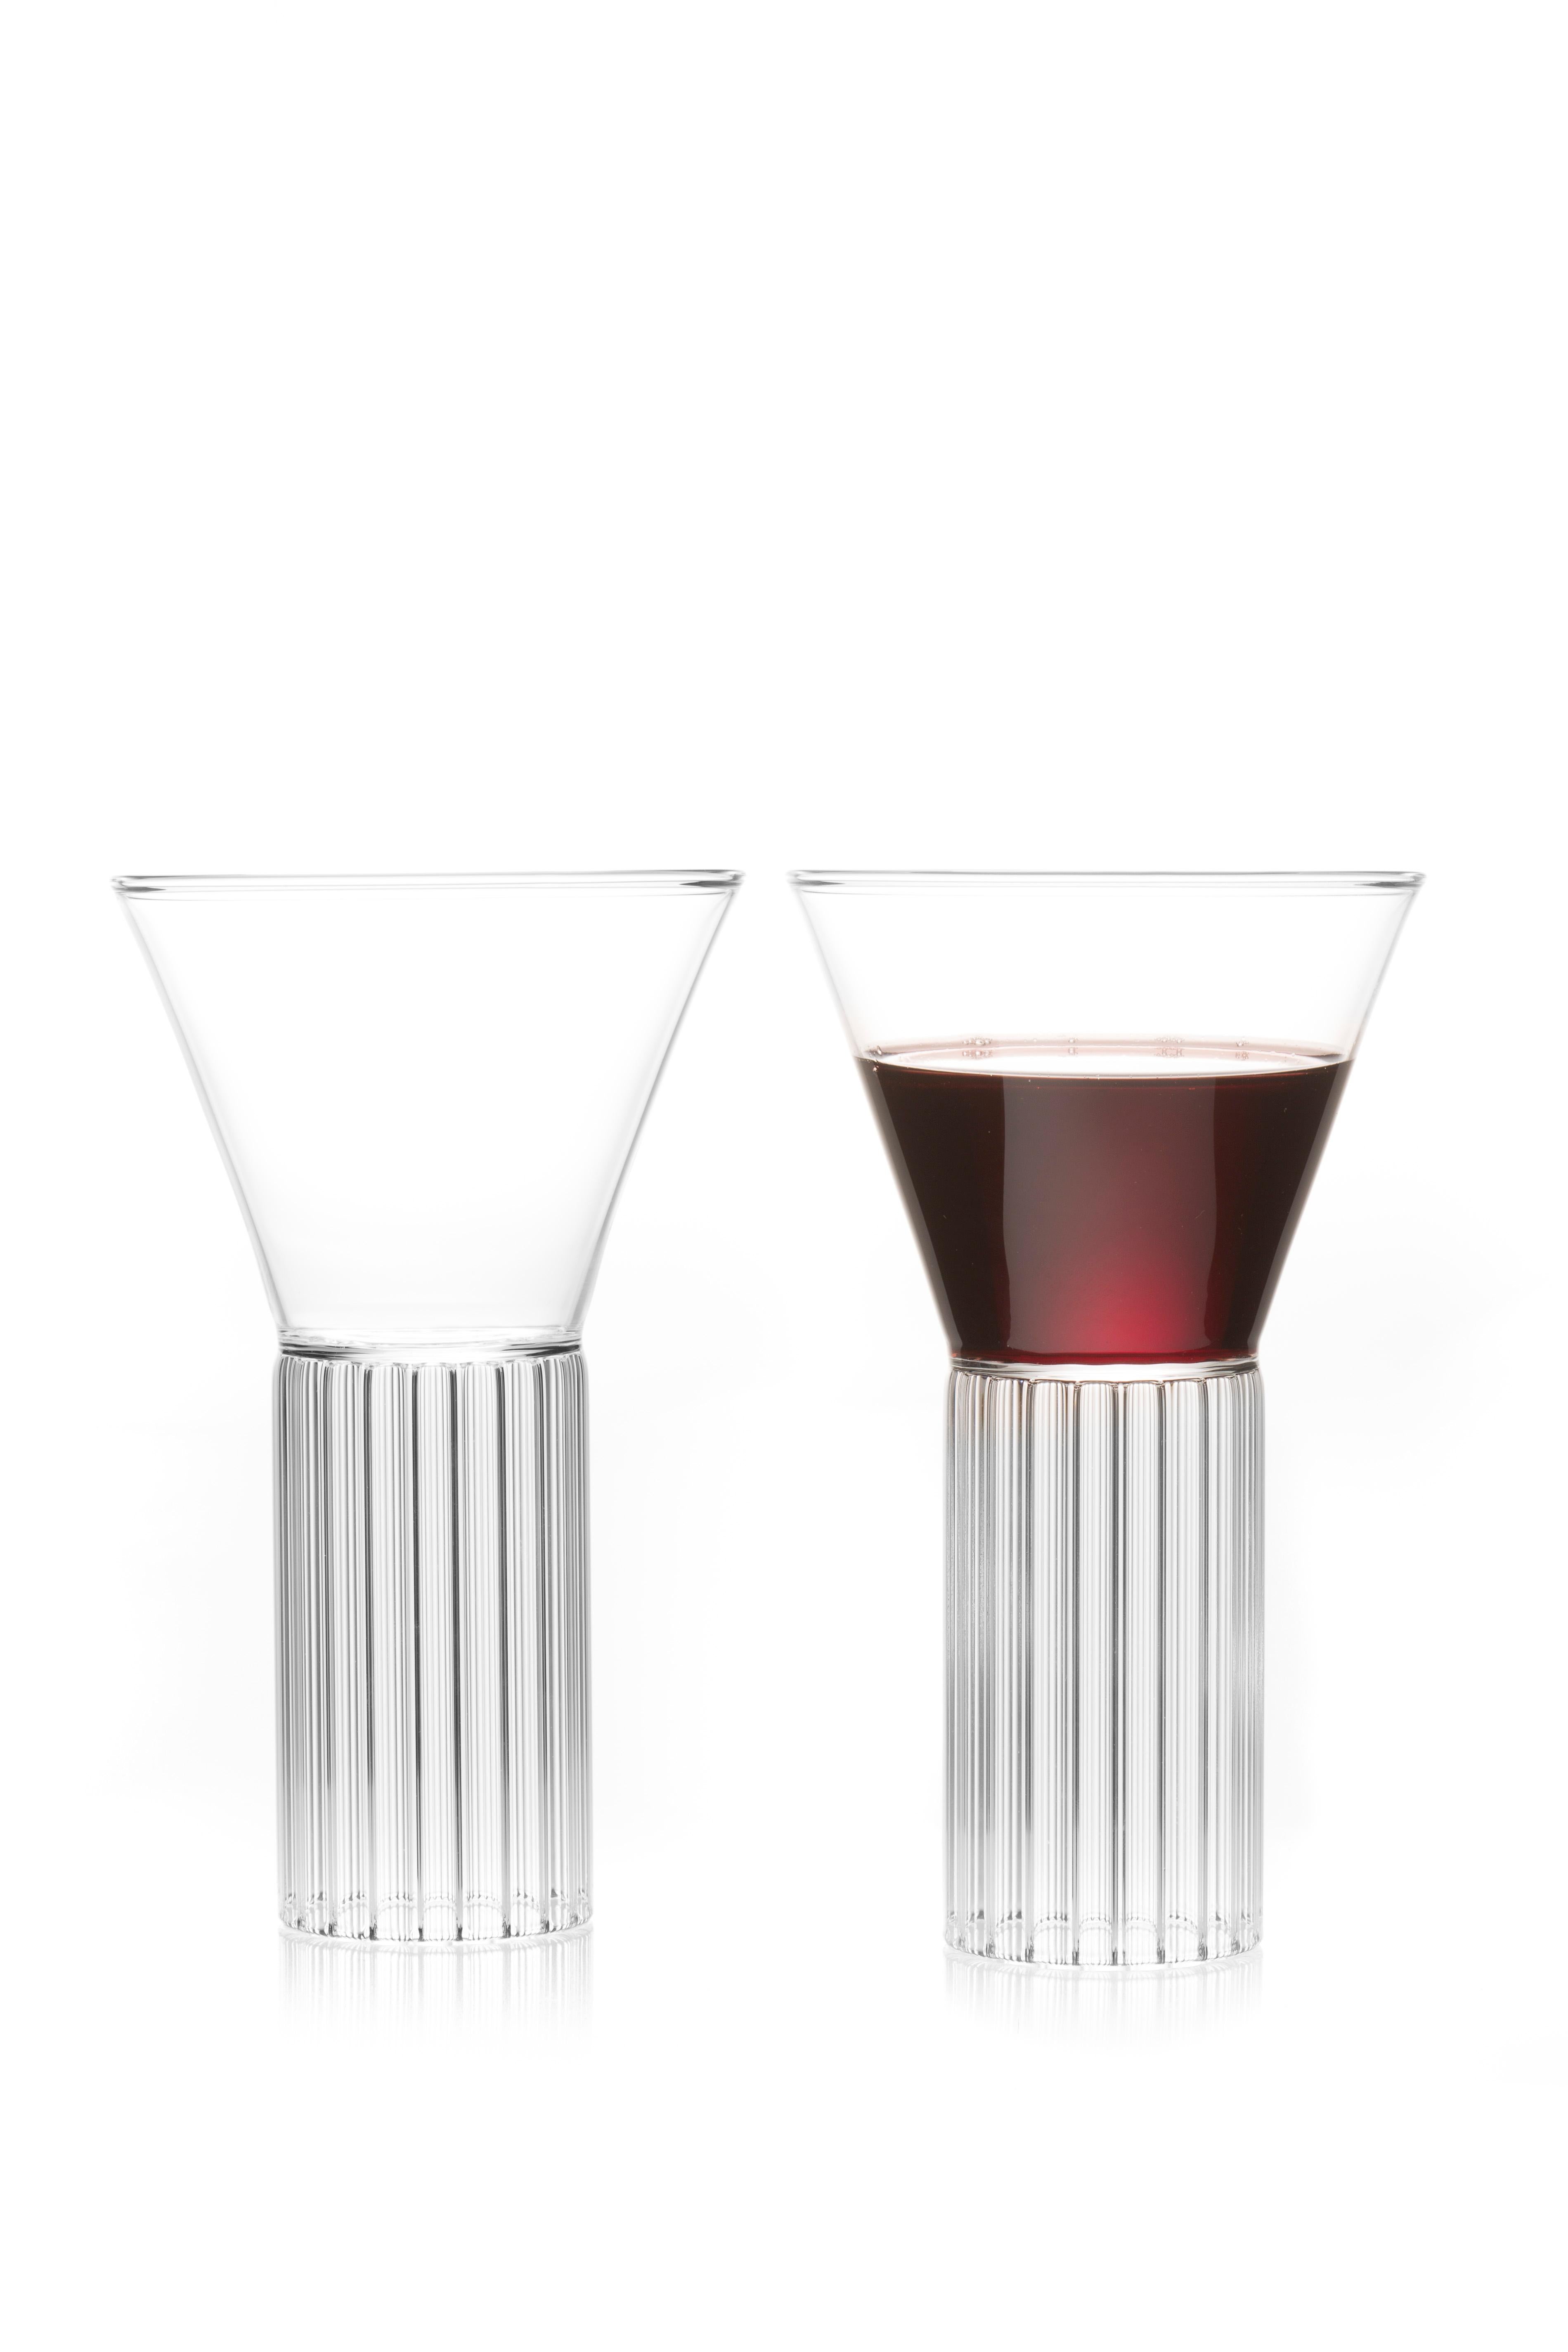 Sofia large cocktail wine glasses, set of two.

With the elegance of a forgotten time, the clear Czech contemporary Sofia collection glasses are a series of barware ideal for beverages from wine and water to martinis and other libations.